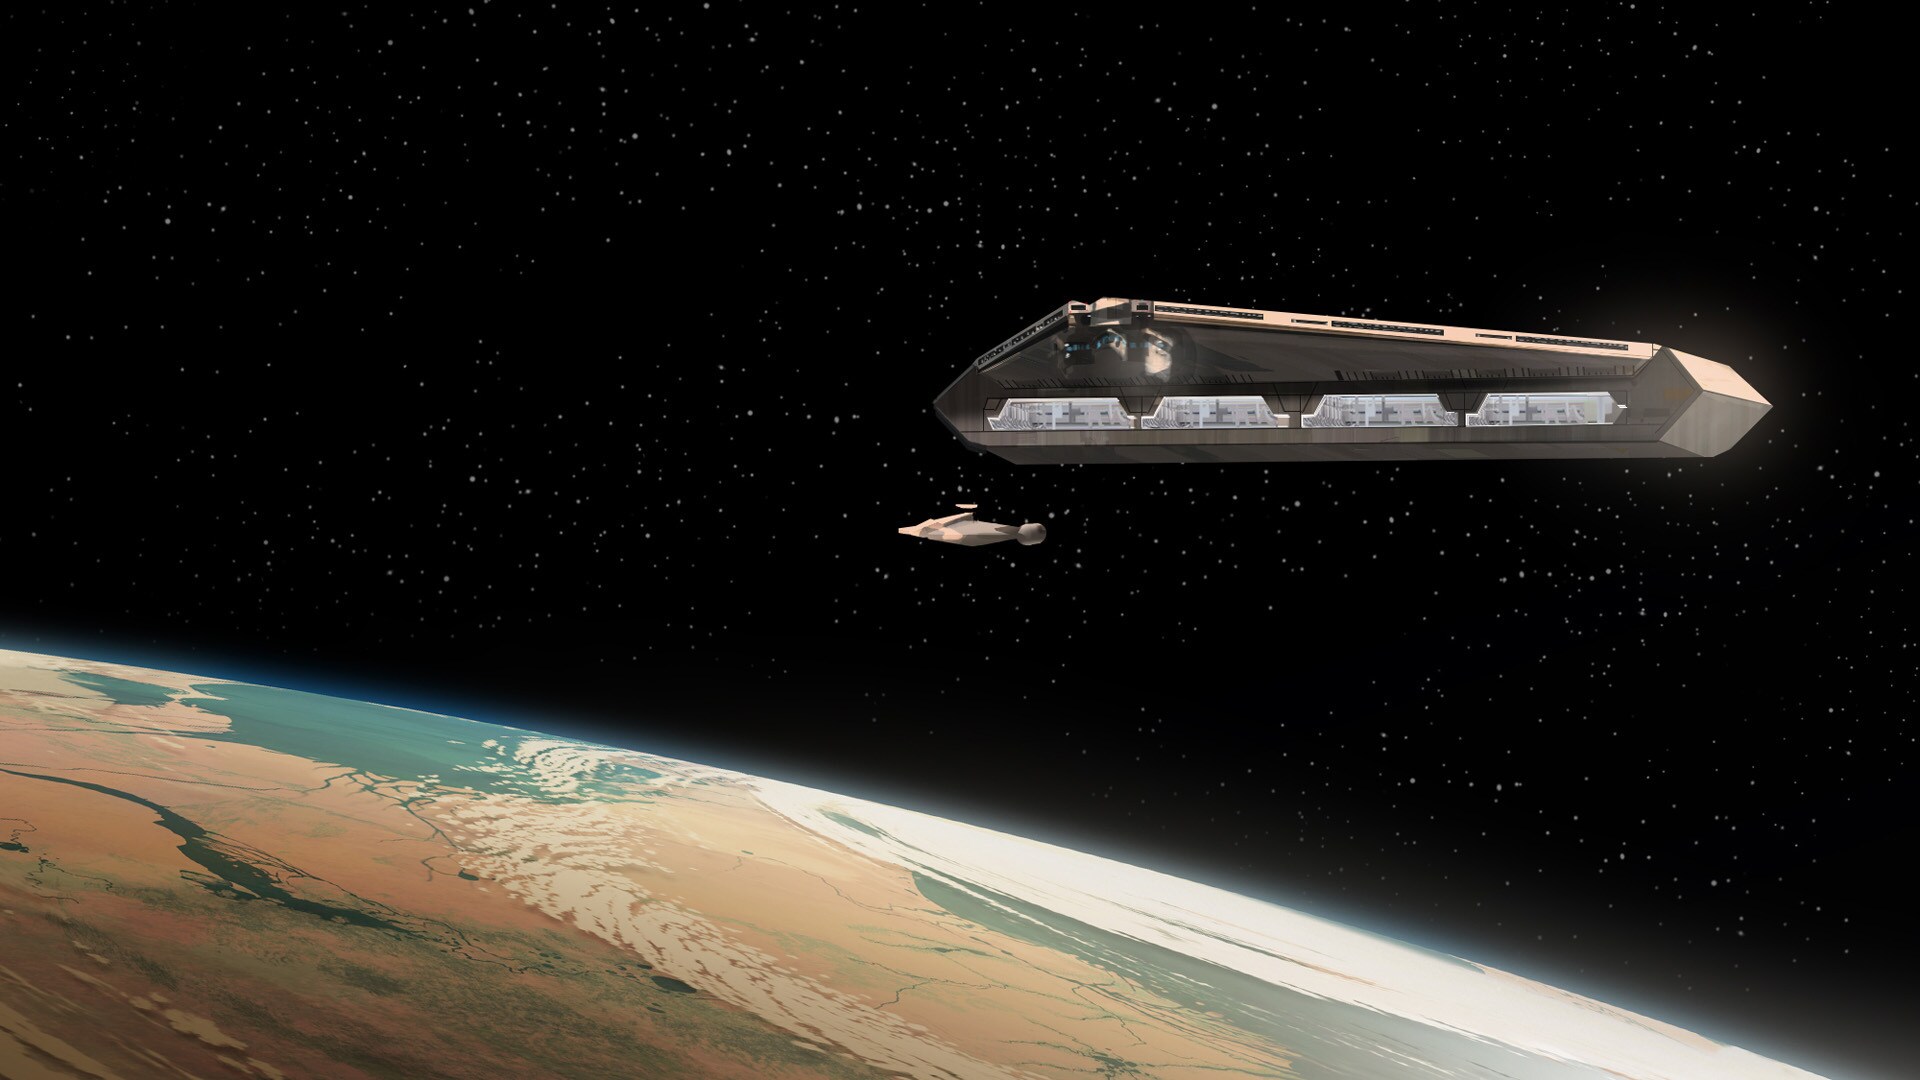 The Ghost approaches the Imperial cruiser, digital lighting concept painting.